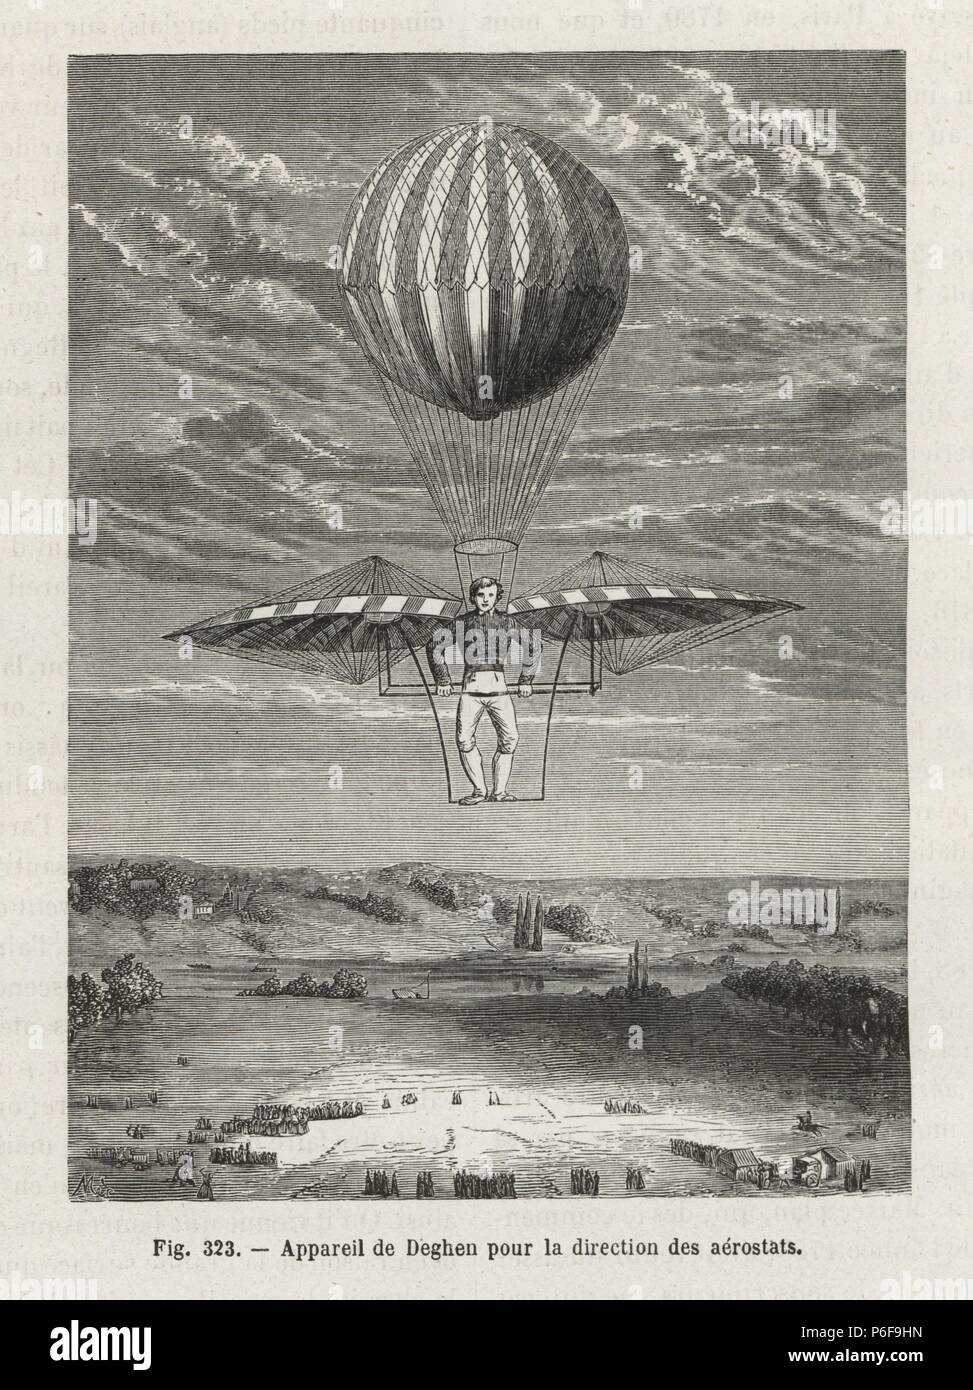 Jacques Deghen, a clockmaker from Vienna, and his balloon with hand-powered wings for direction, circa 1808. Woodblock engraving by Mes from Louis Figuier's "Les Merveilles de la Science: Aerostats" (Marvels of Science: Air Balloons), Furne, Jouvet et Cie, Paris, 1868. Stock Photo